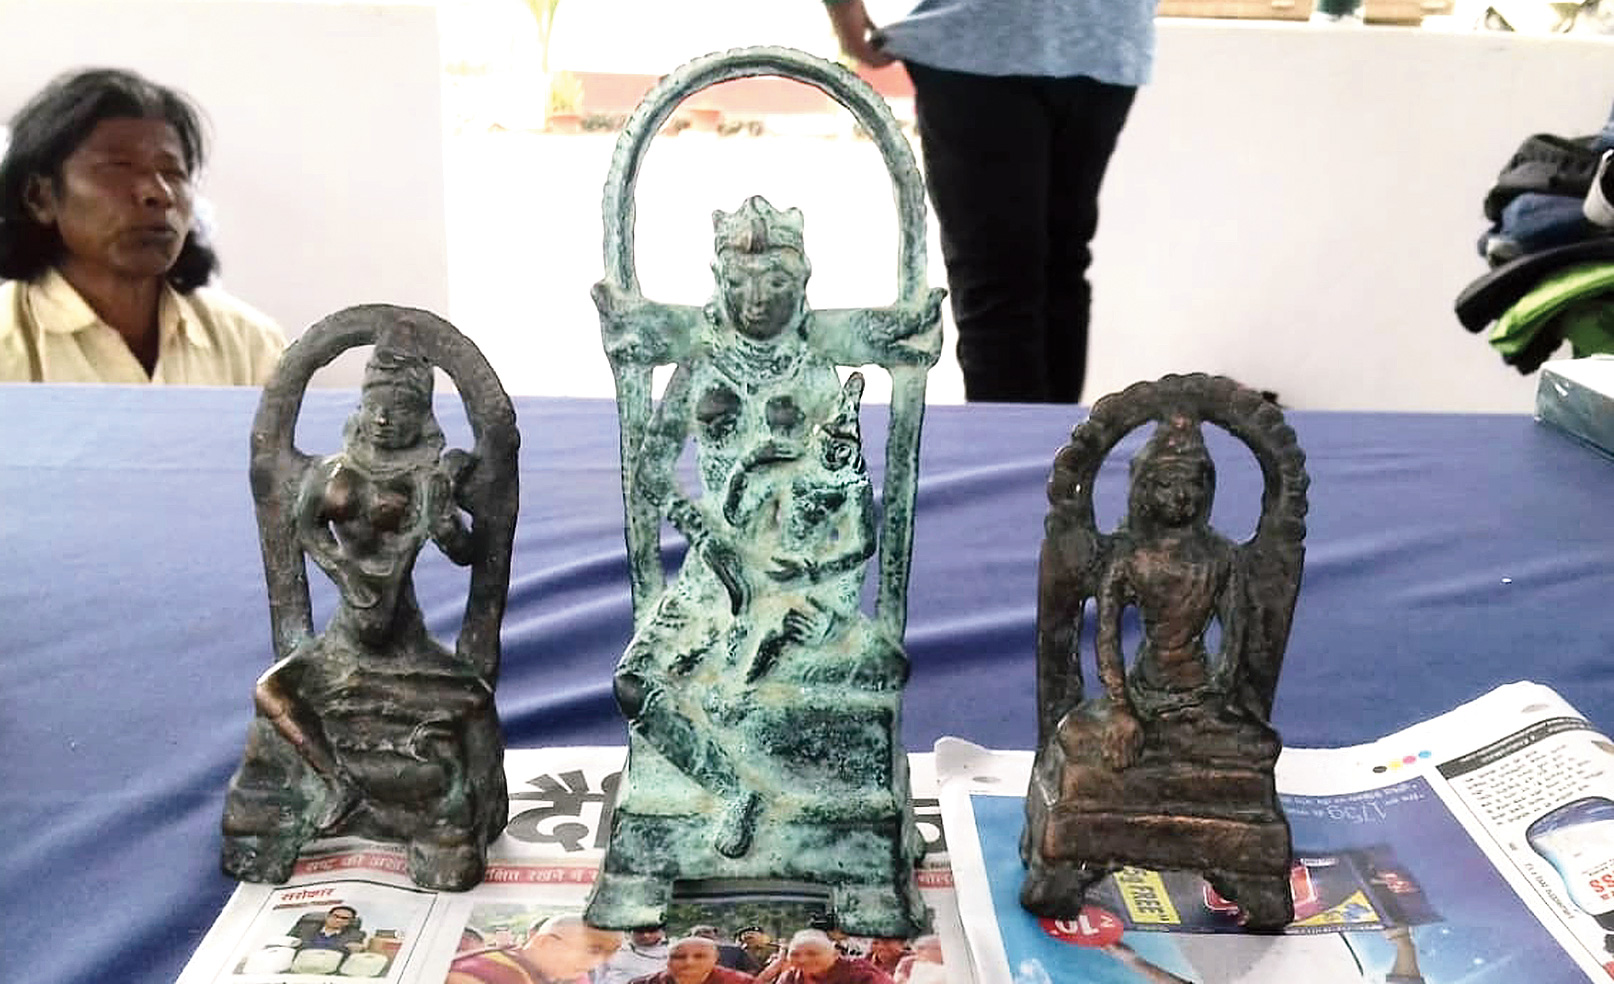 The antique idols seized from the Nepal border
